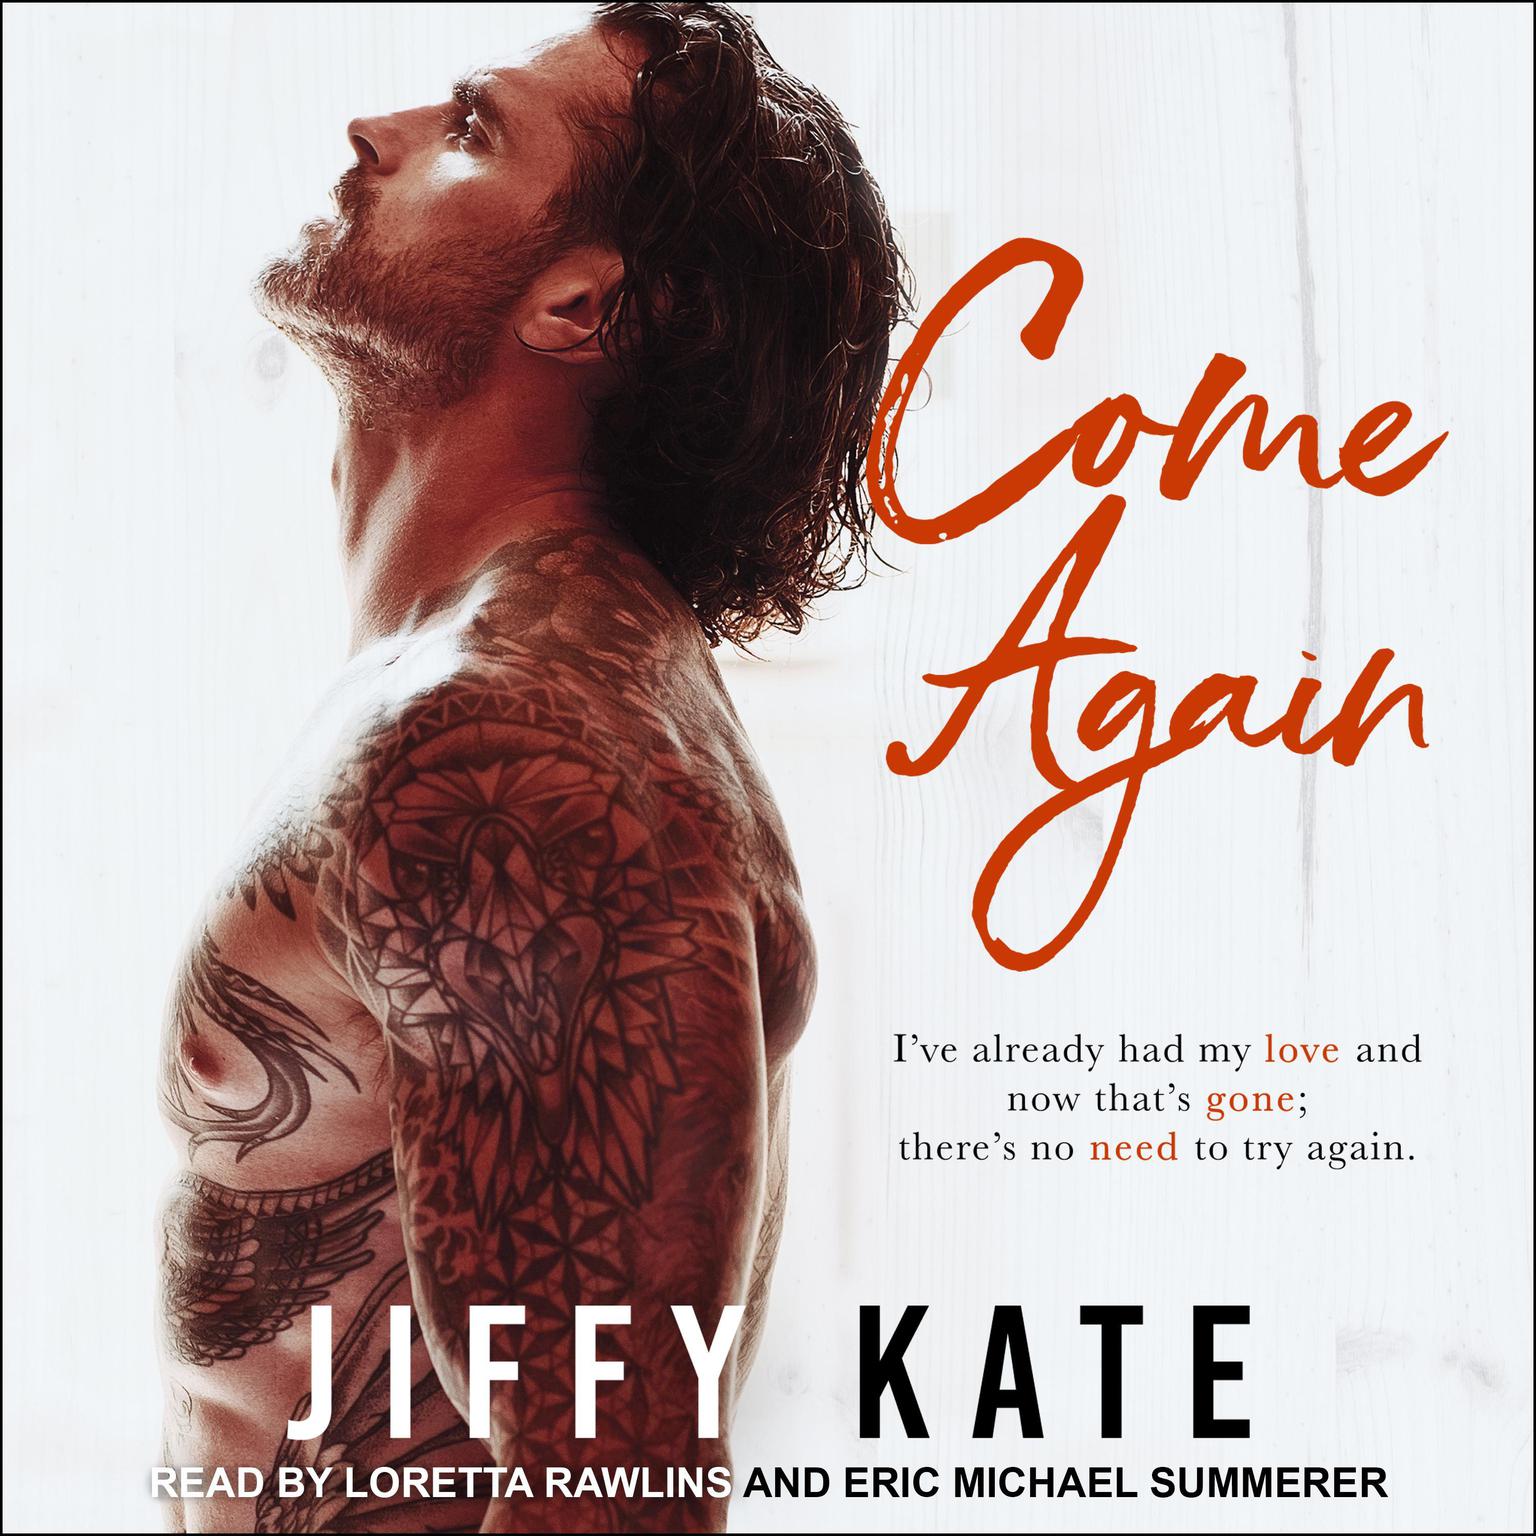 Come Again Audiobook, by Jiffy Kate